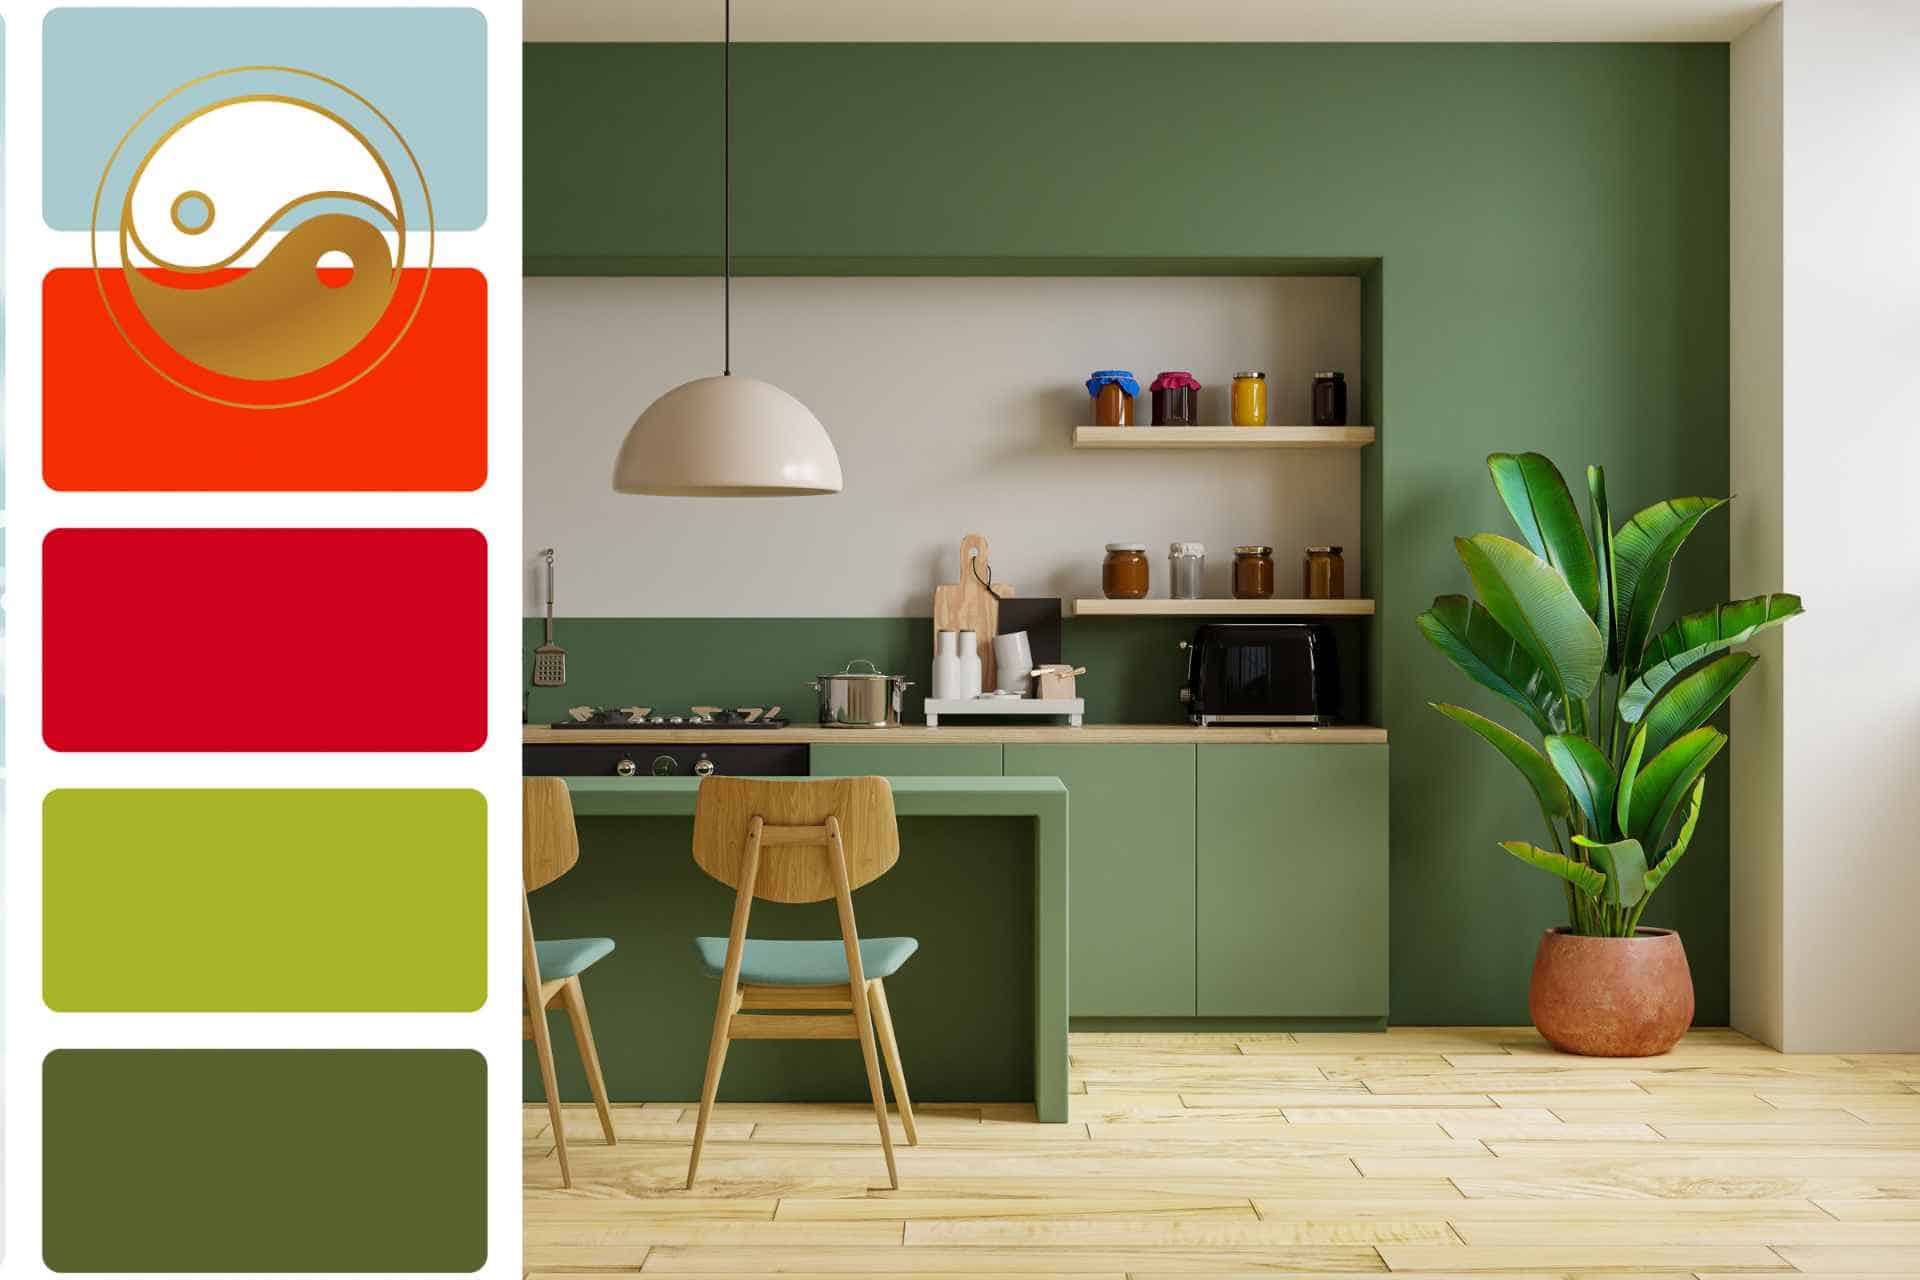 what is the best feng shui color for a kitchen?